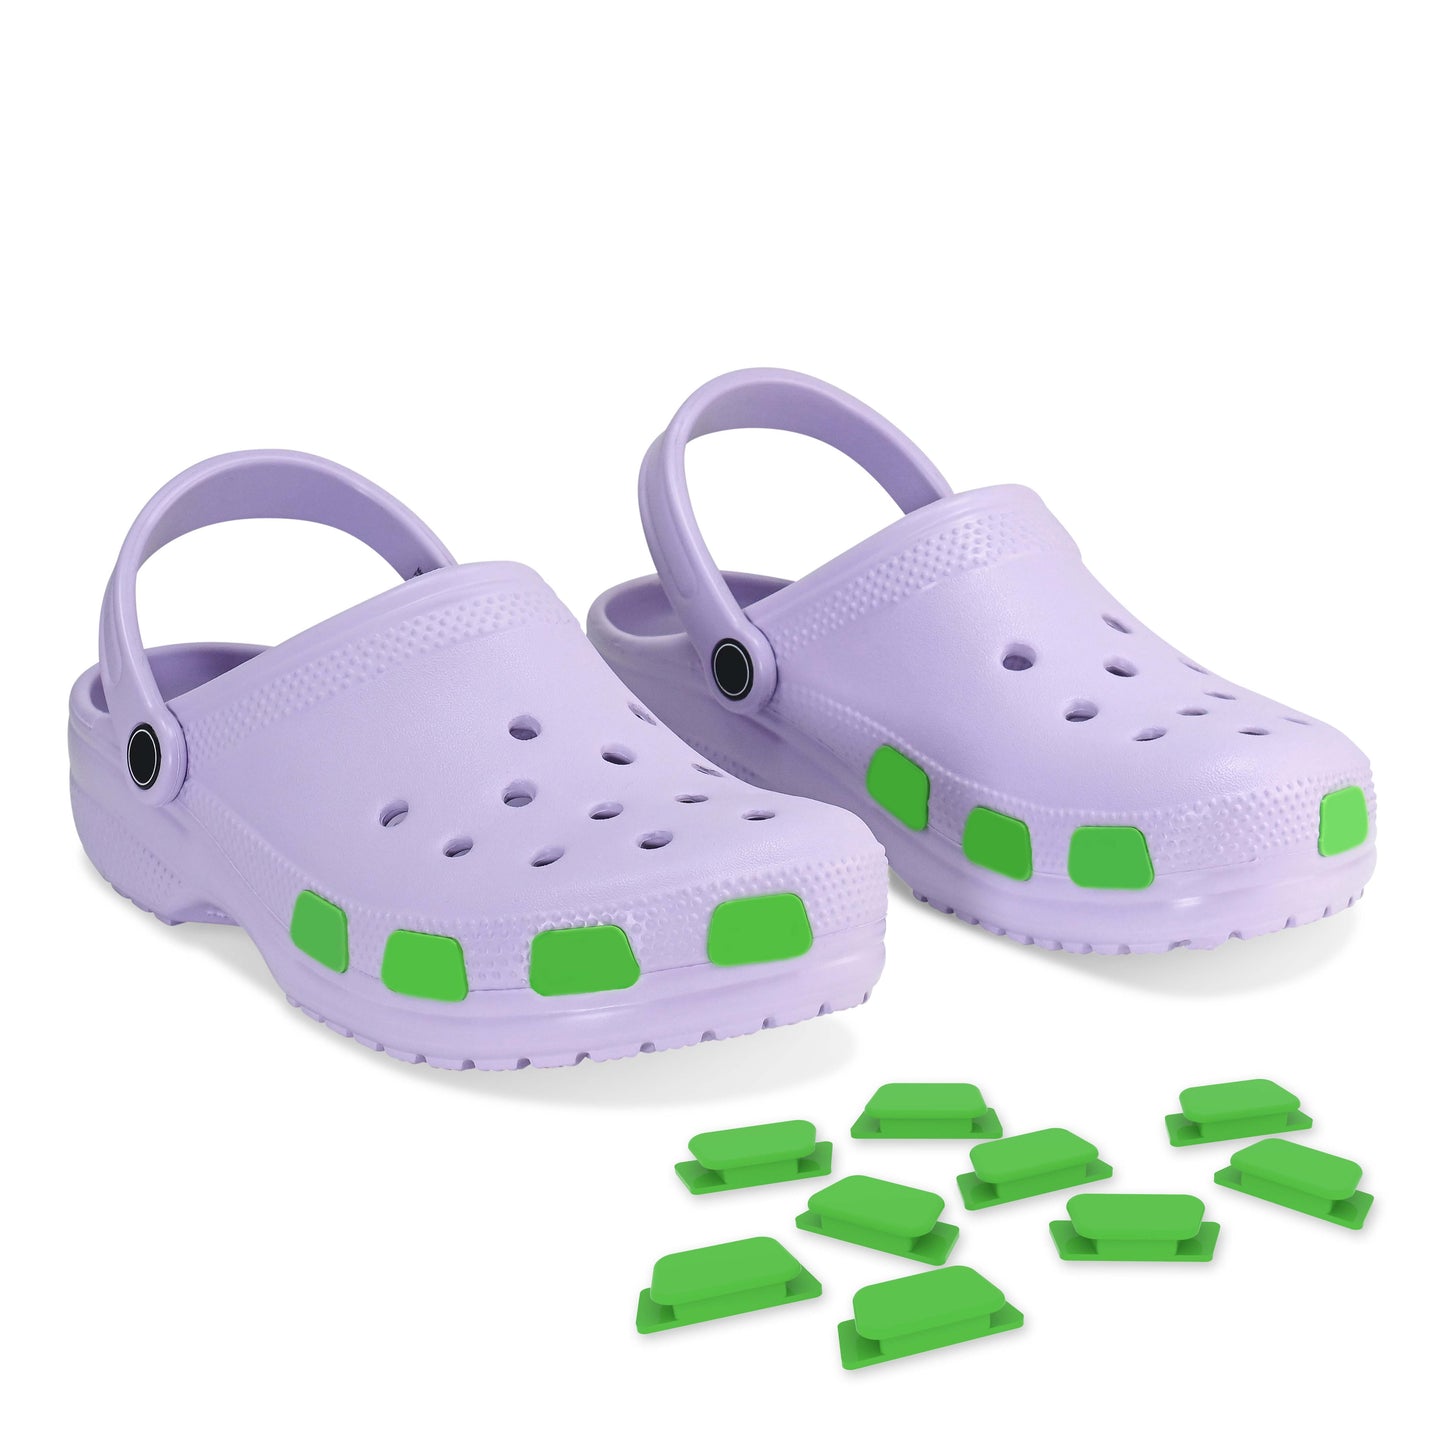 SHUTTERZ (GREEN) 14 Pack  Colored Shoe Charms Compatible with Classic Crocs, Crush Crocs, and All Terrain Crocs